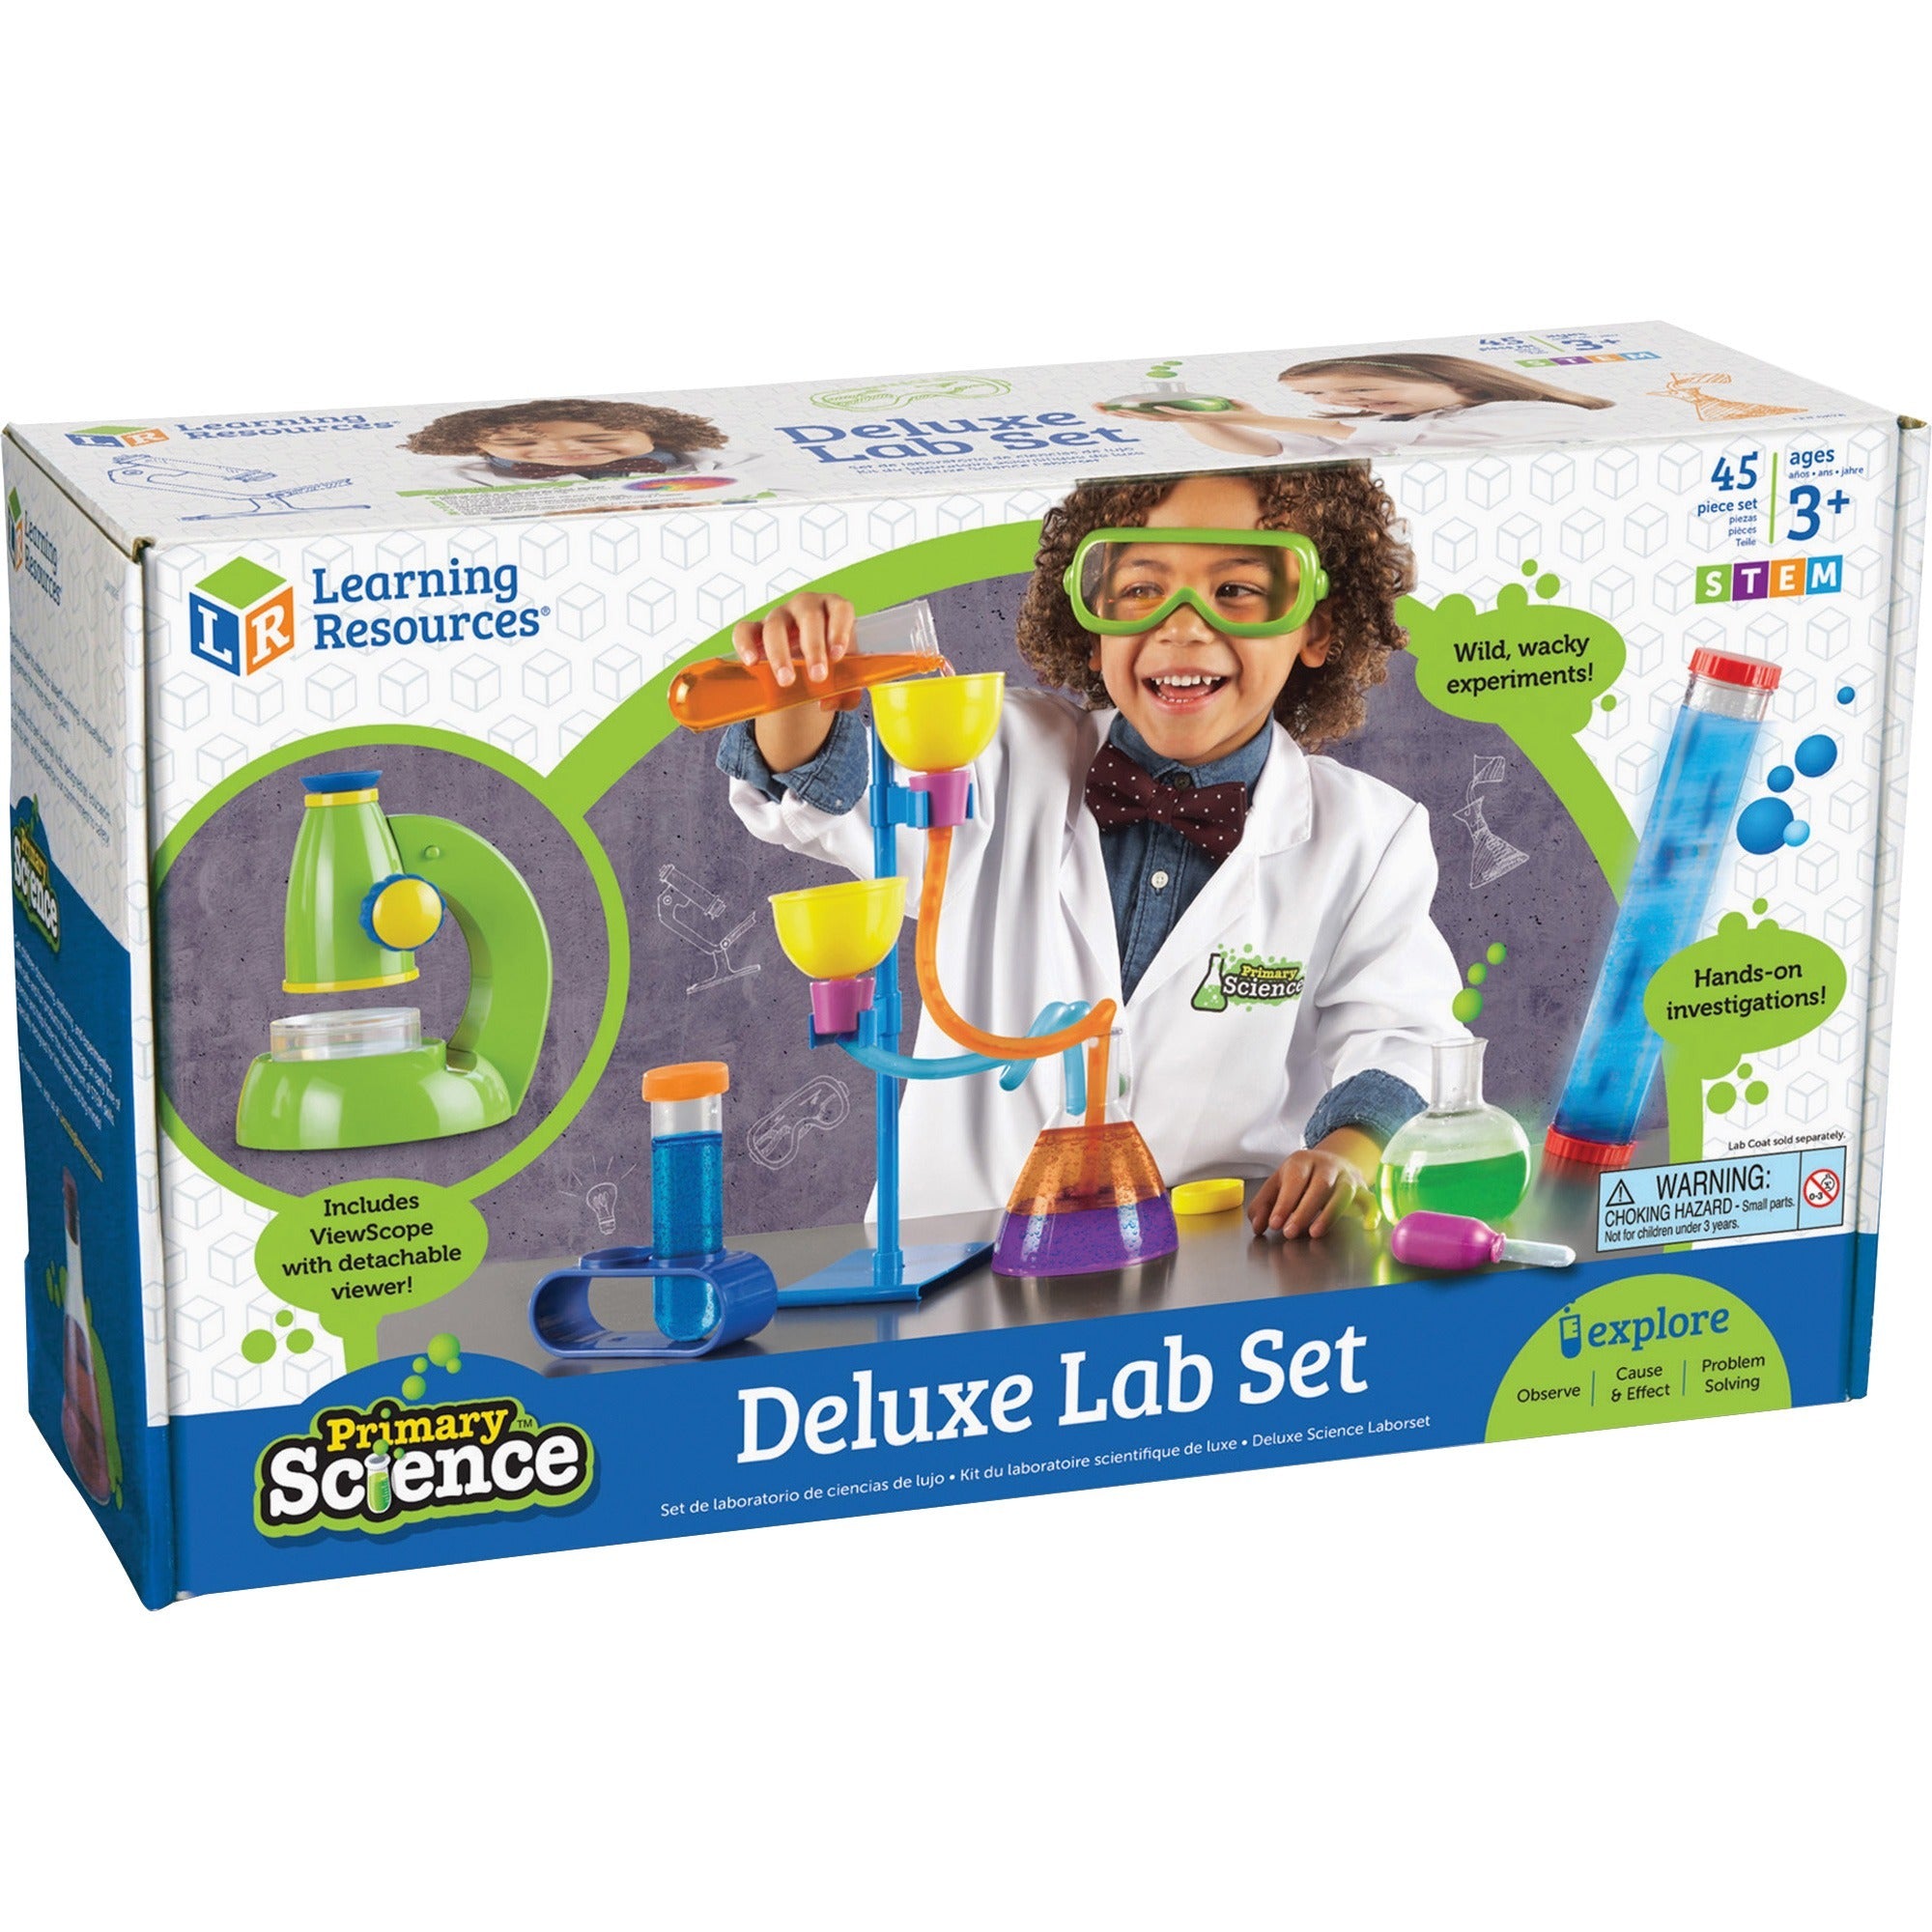 learning-resources-age3+-primary-science-deluxe-lab-set-theme-subject-learning-skill-learning-science-experiment-problem-solving-visual-fine-motor-direction-sequential-thinking-prediction-45-pieces-3+-1-set_lrnler0826 - 1